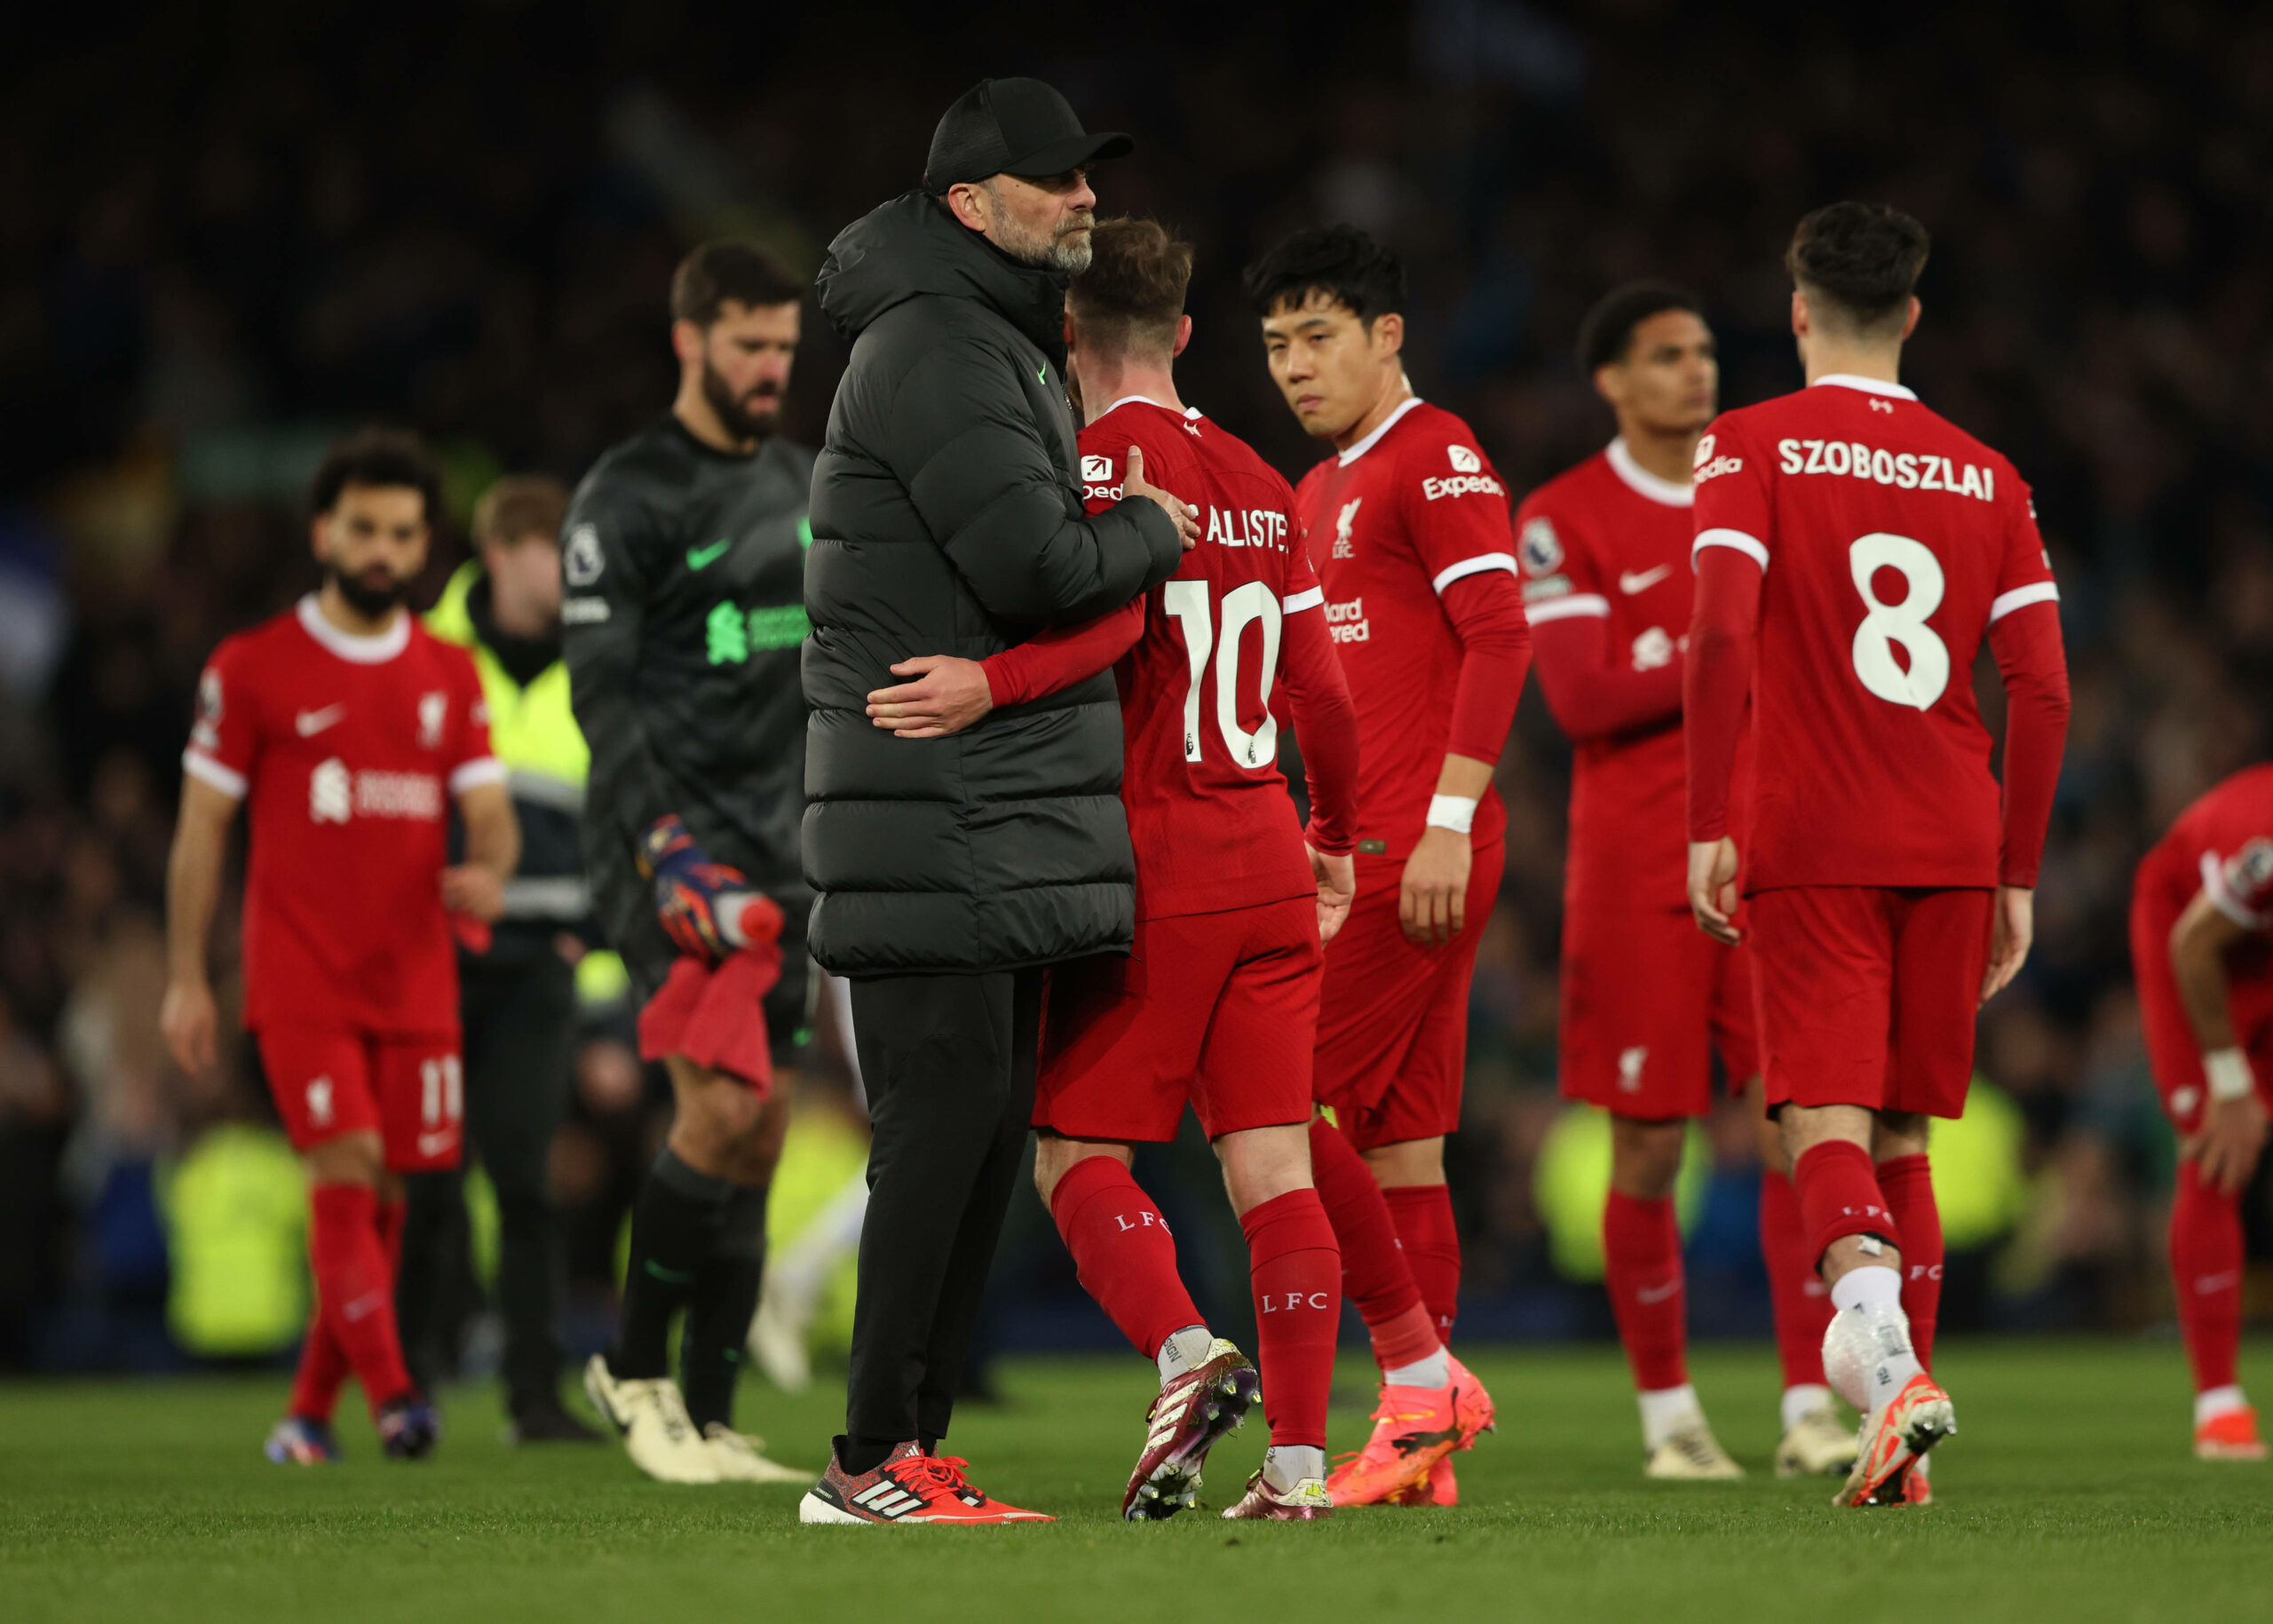 Jurgen Klopp Issues Top Four Warning After Liverpool's Defeat to Everton